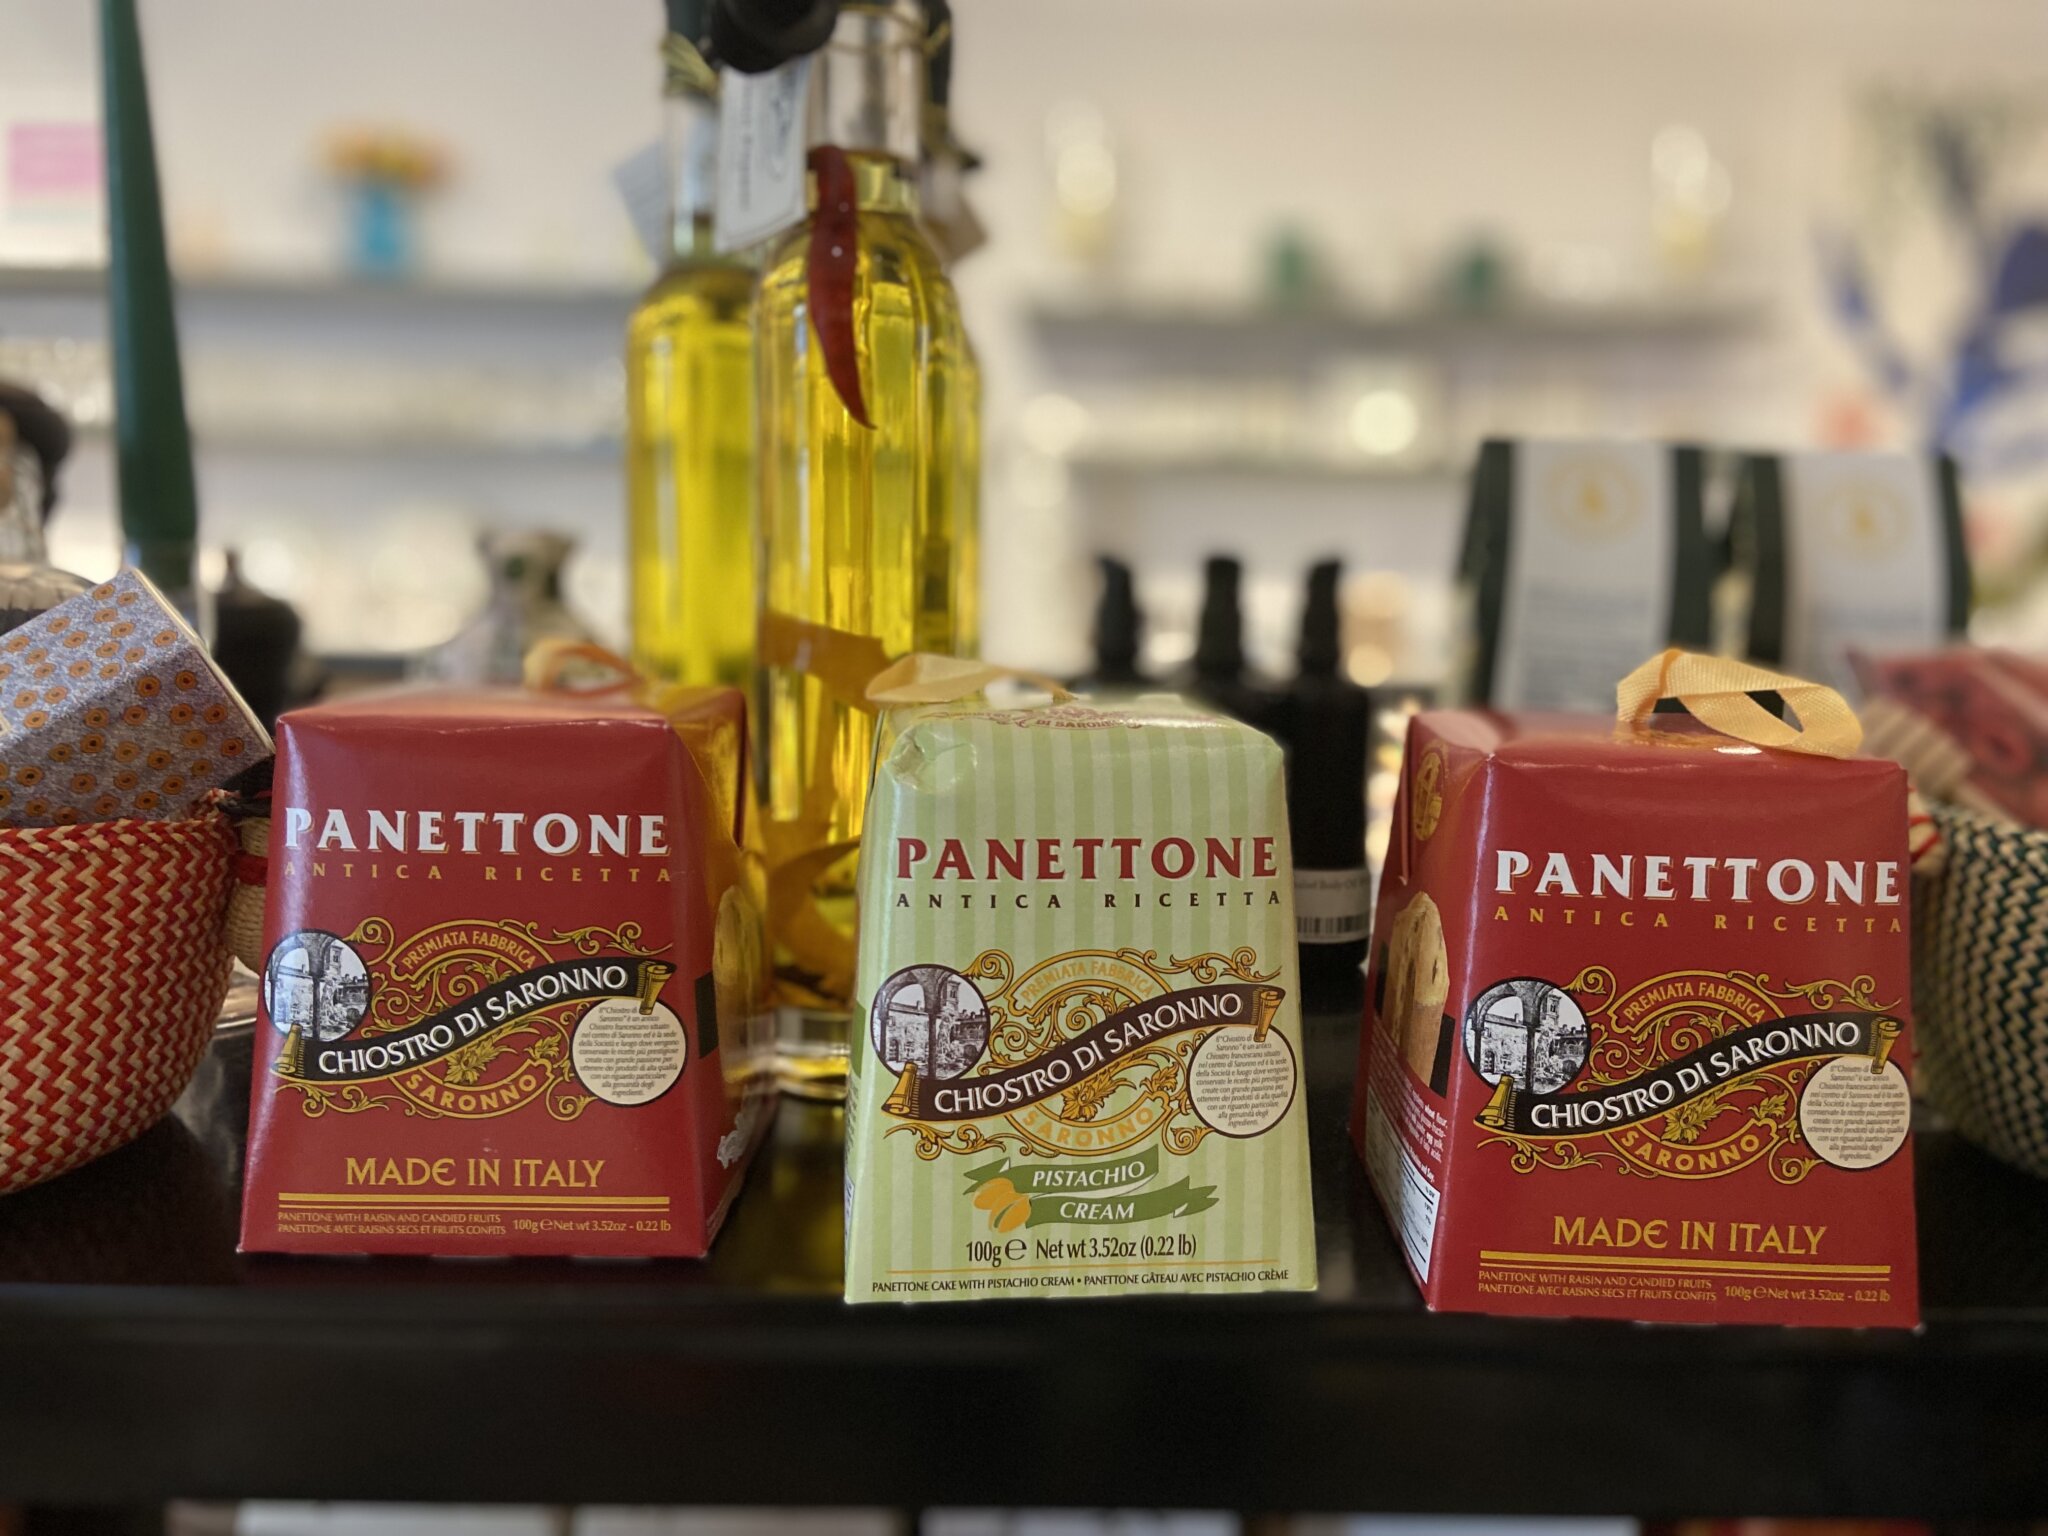 Can't go wrong with the gift of a classic Panettone for the holidays